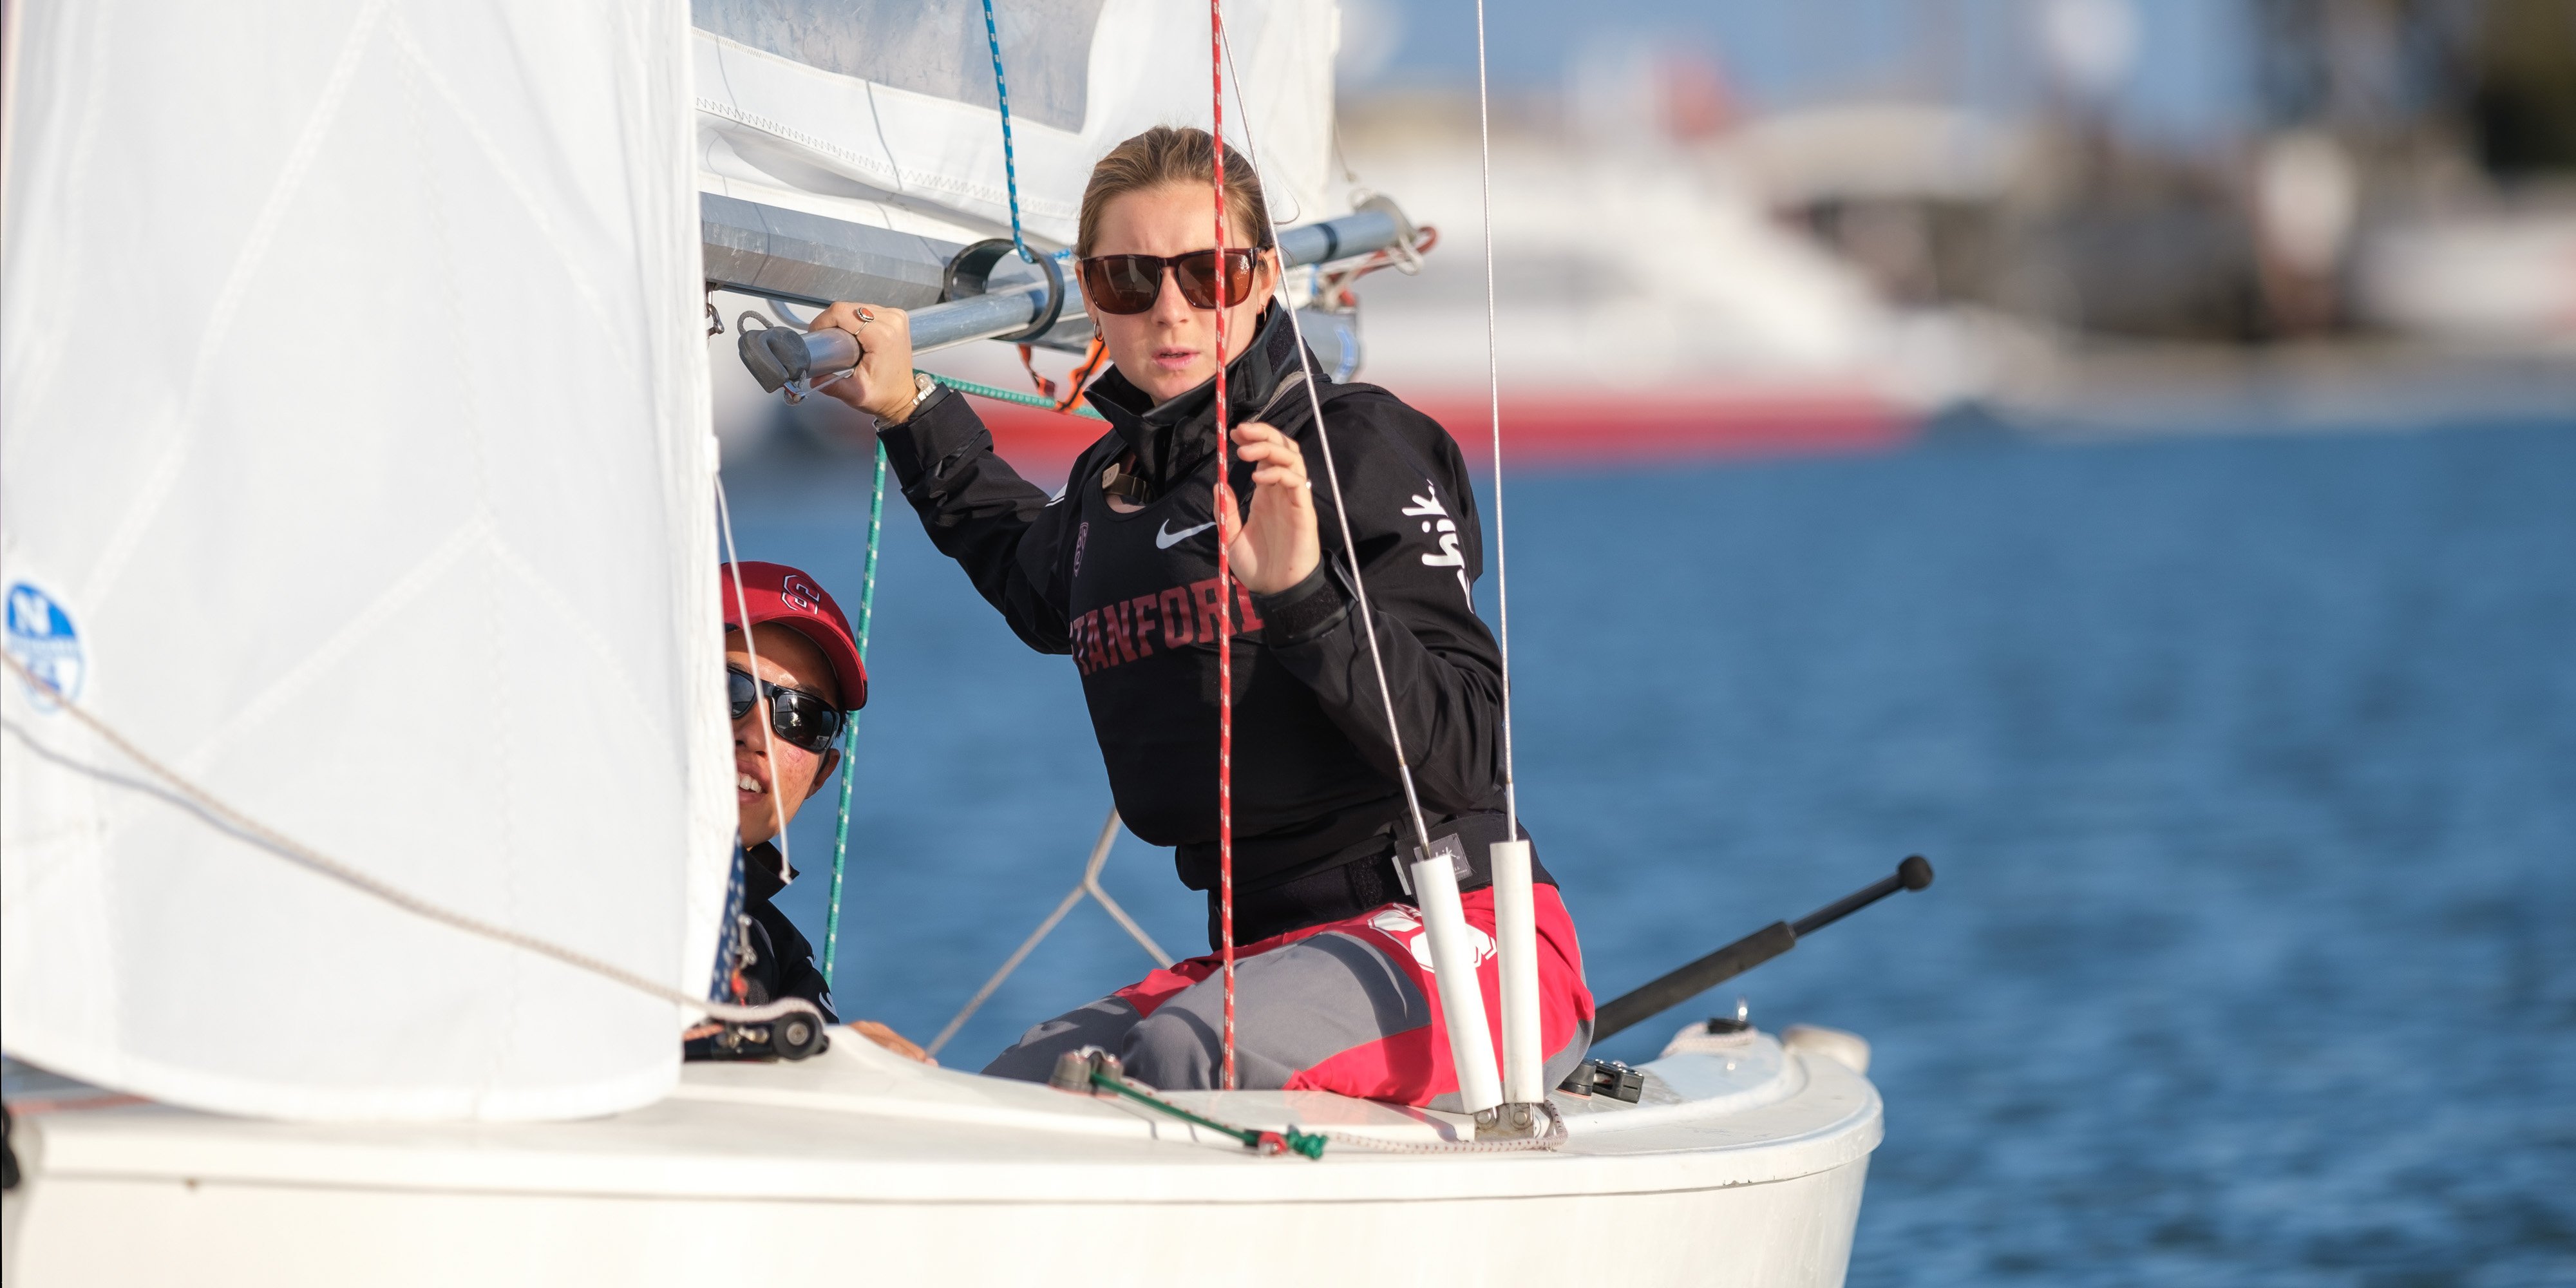 Sailing yields mixed results in disgraced coach's last weekend